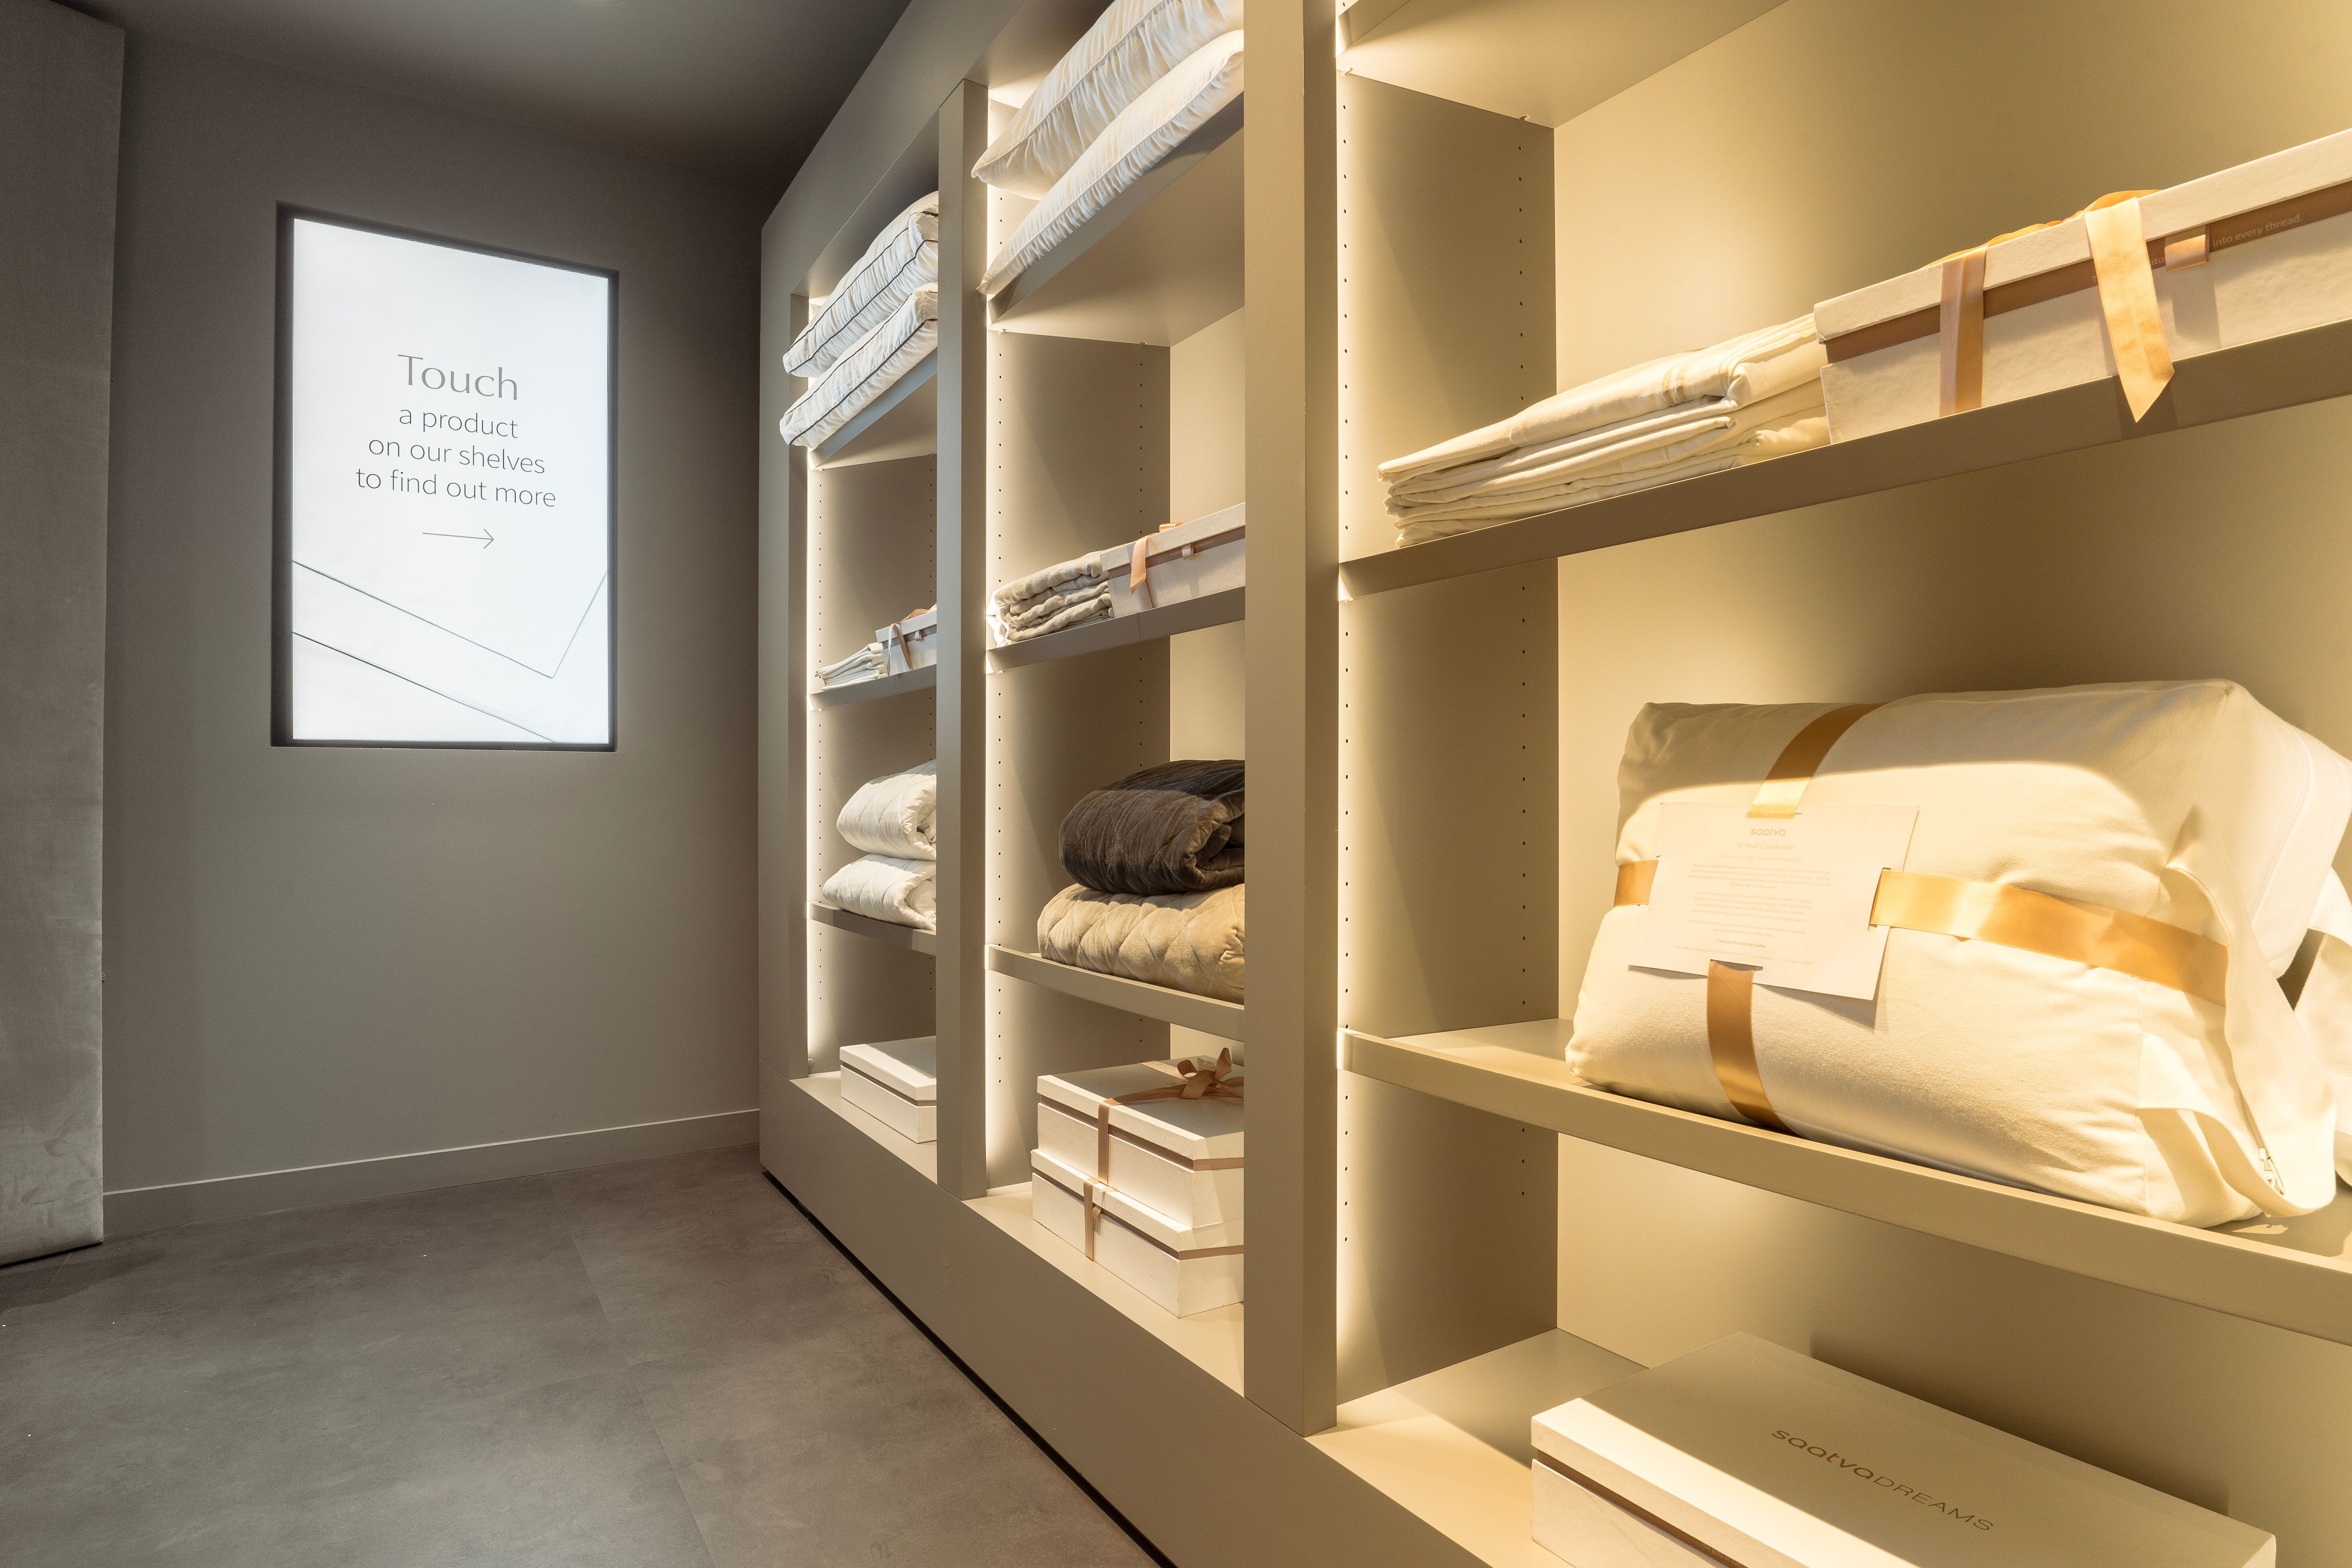 The Saatva New York Viewing Room touch-activated Bedding and Sleep Accessories Wall 